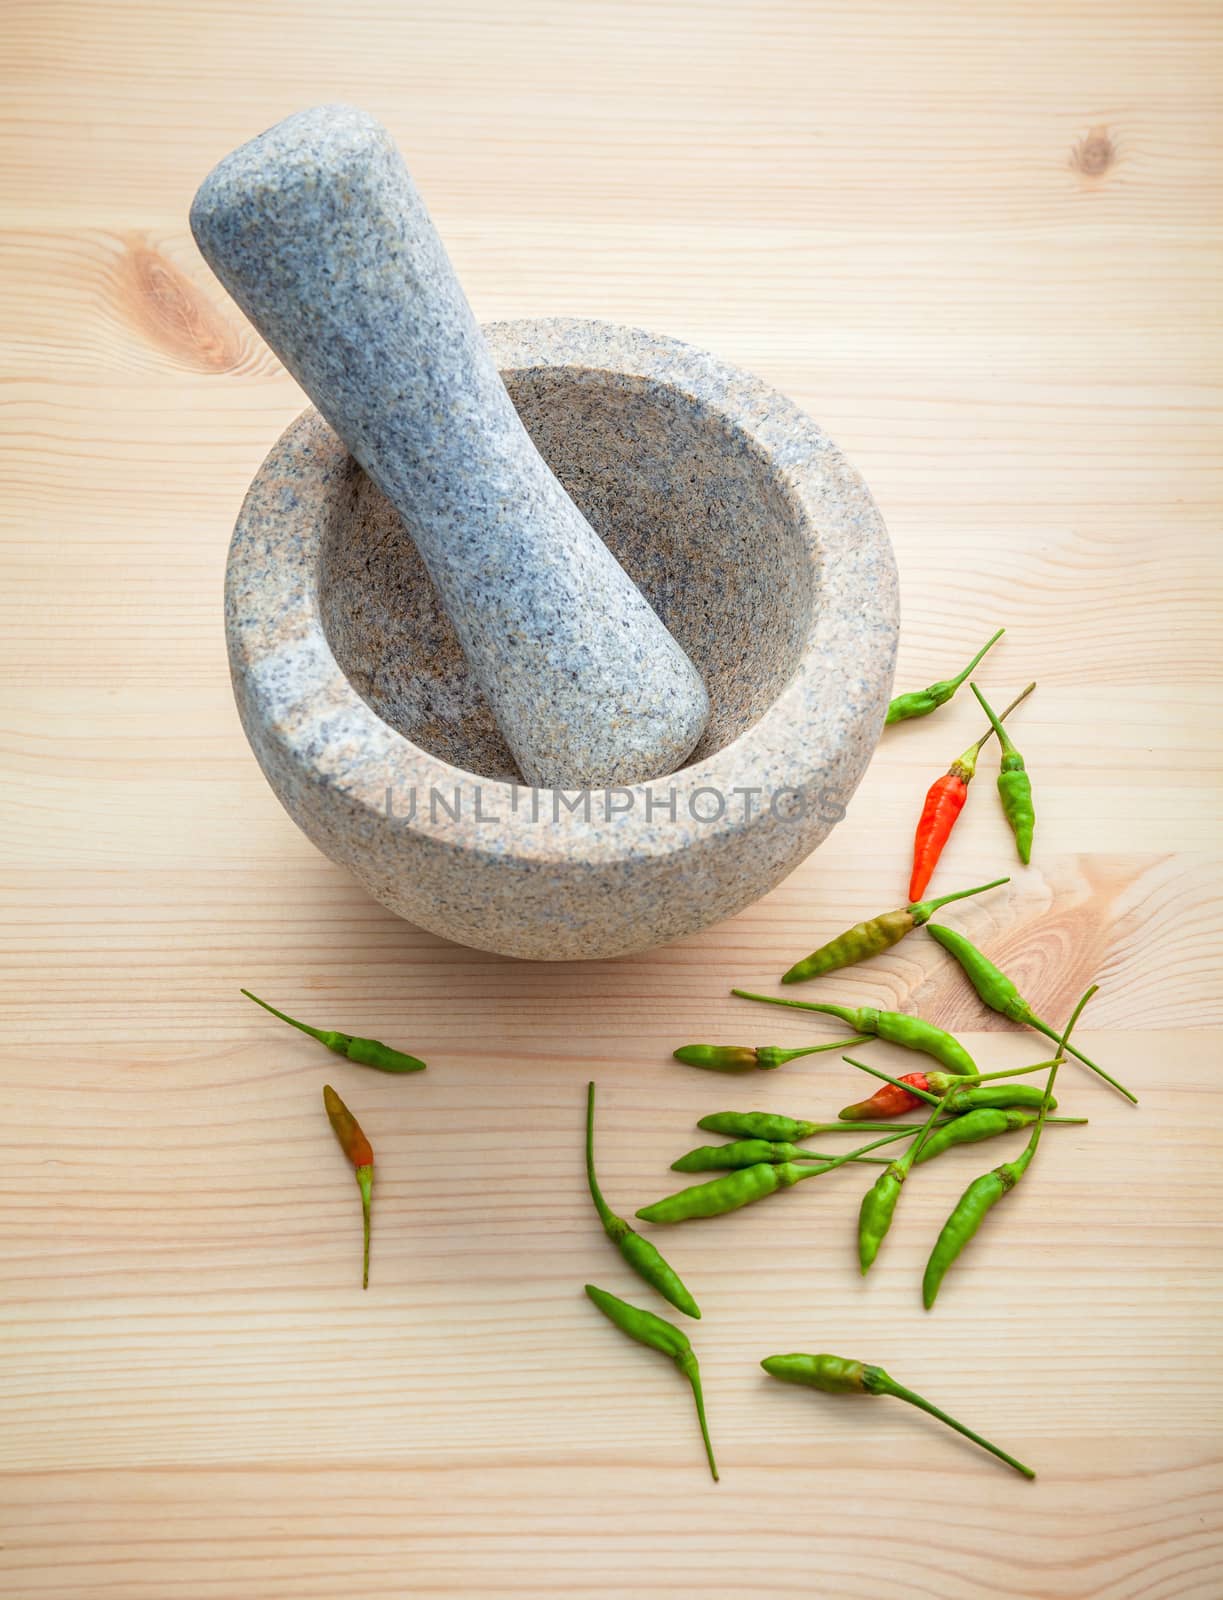 Fresh Chillies on white wooden background with mortar and pestle. Selective focus depth of field.